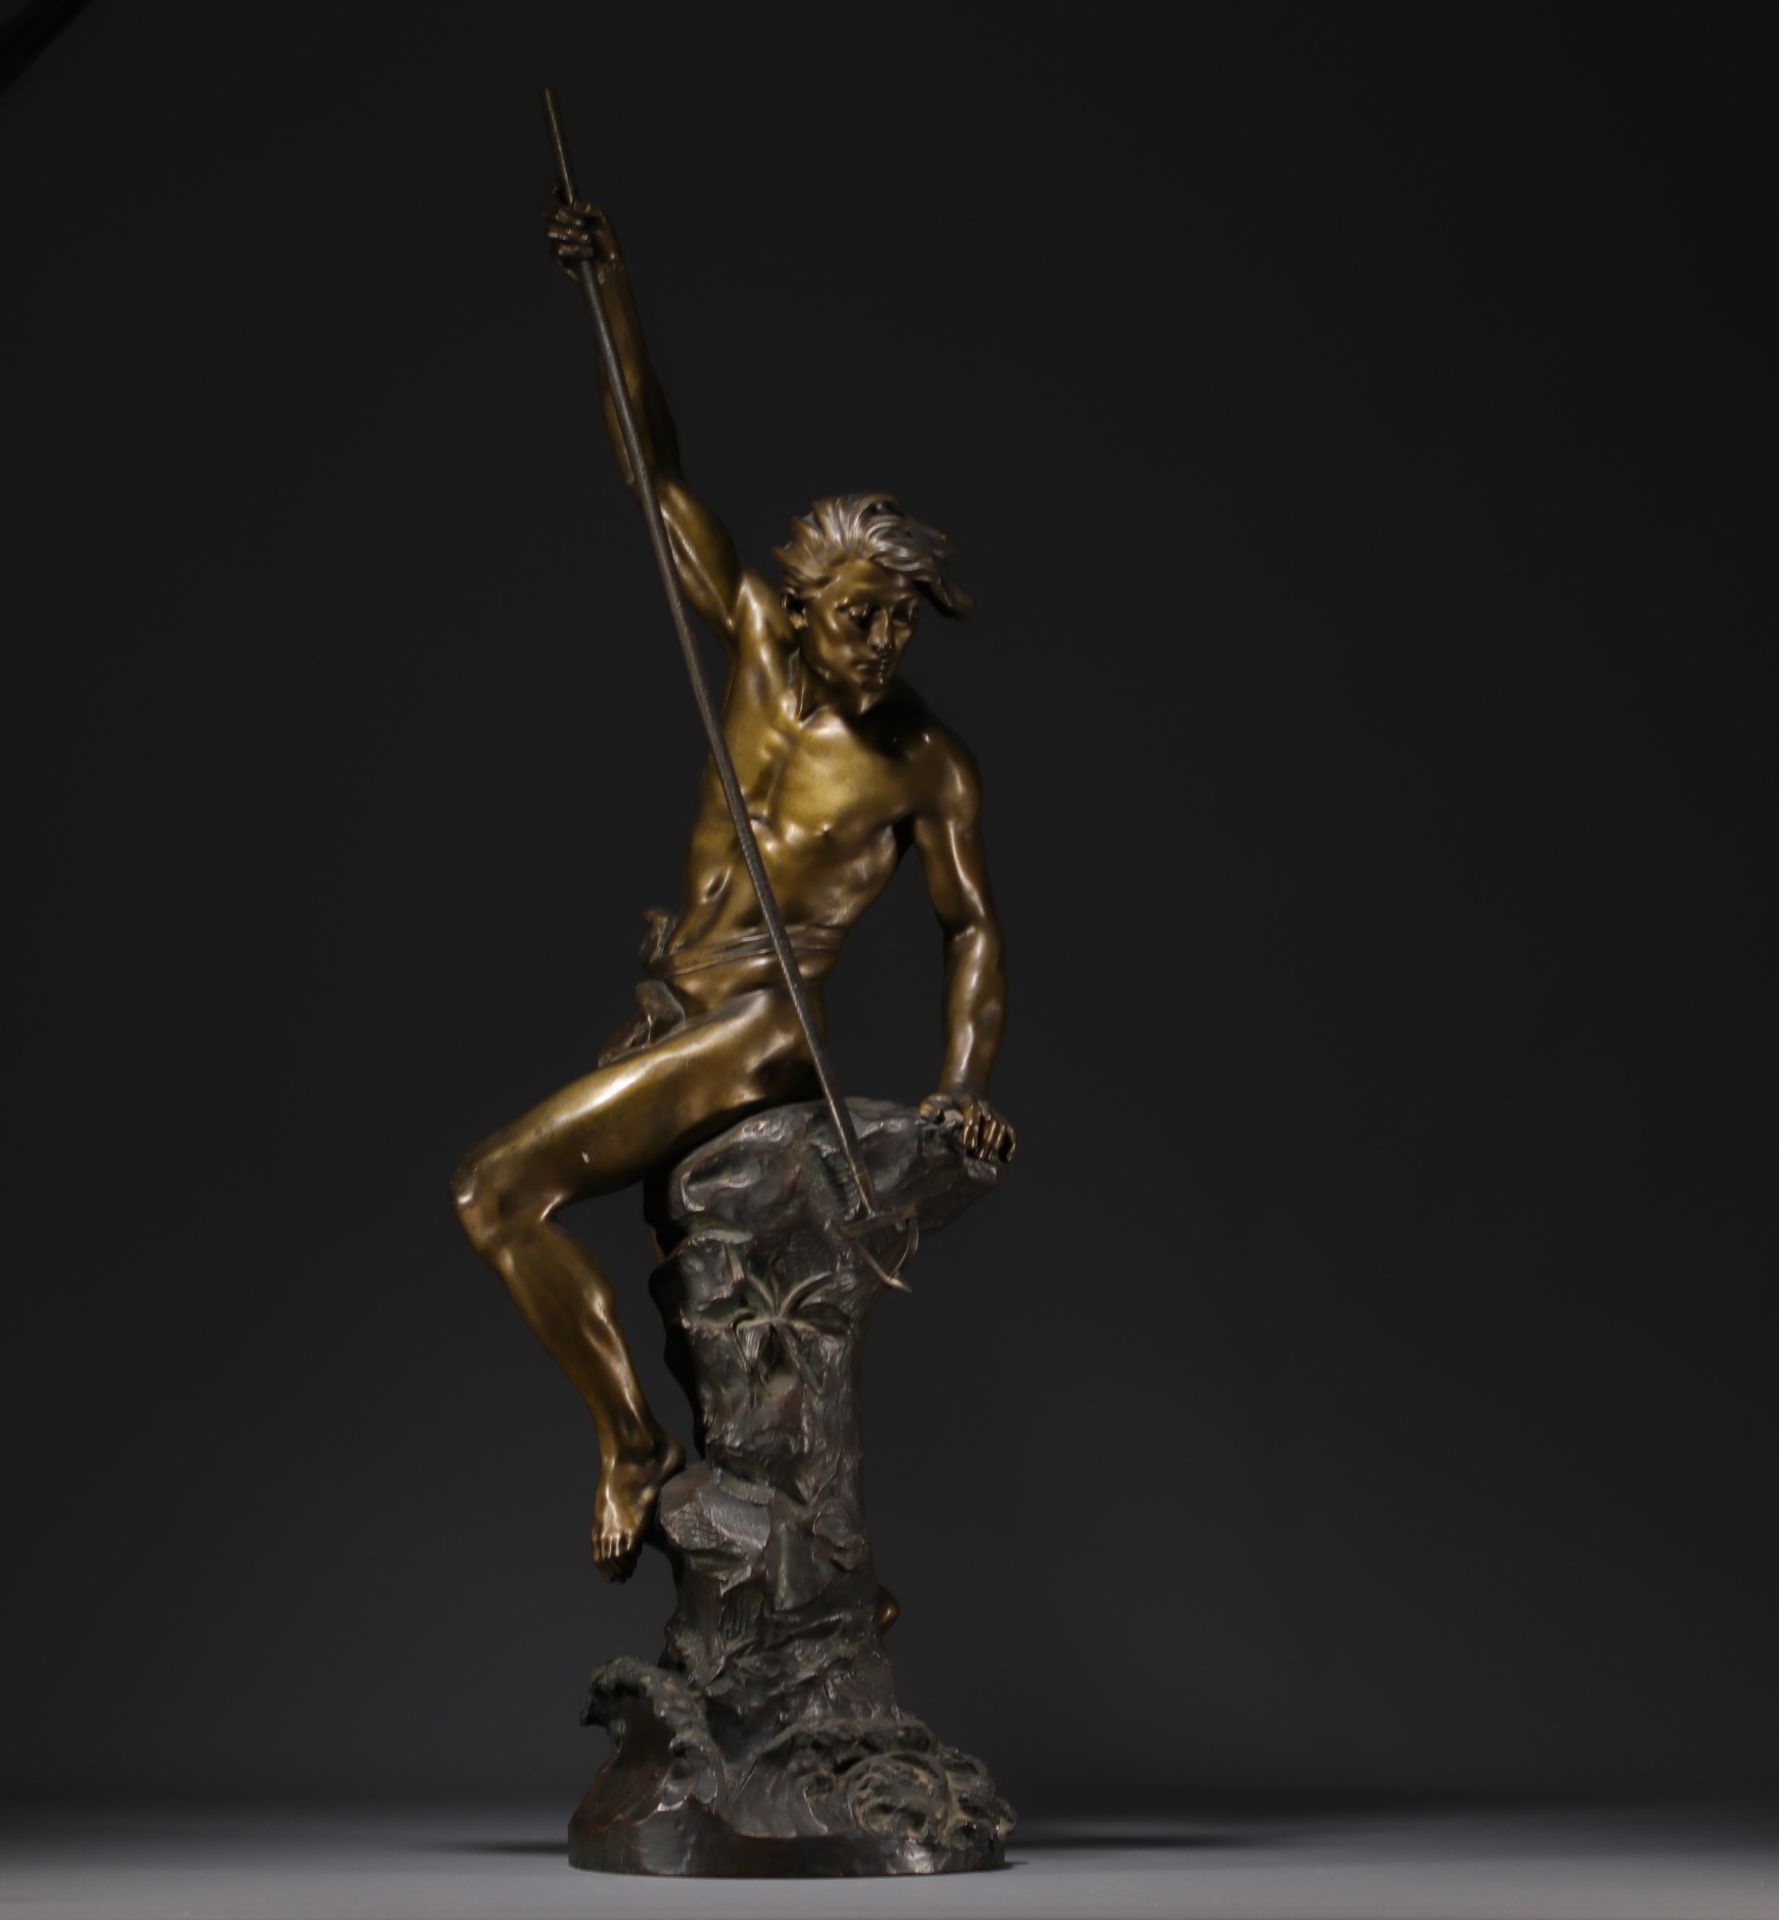 Ernest Justin FERRAND (1846-1932) "The young sinner" Sculpture in chased and patinated bronze. - Bild 6 aus 7